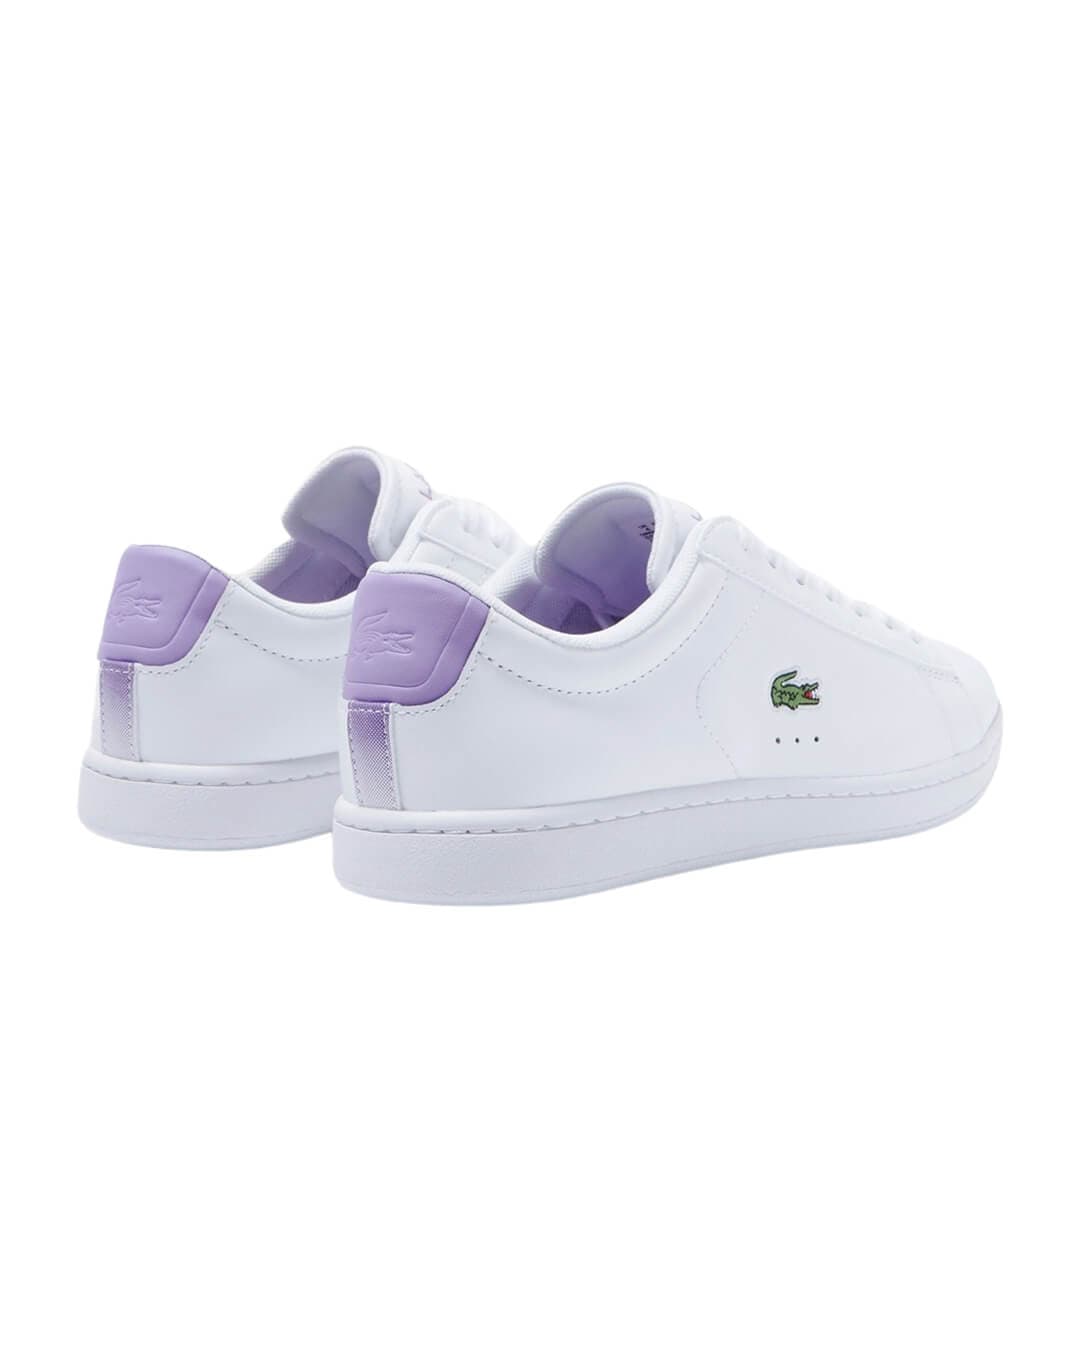 Lacoste Shoes Lacoste Carnaby Leather Popped Heel White Sneakers